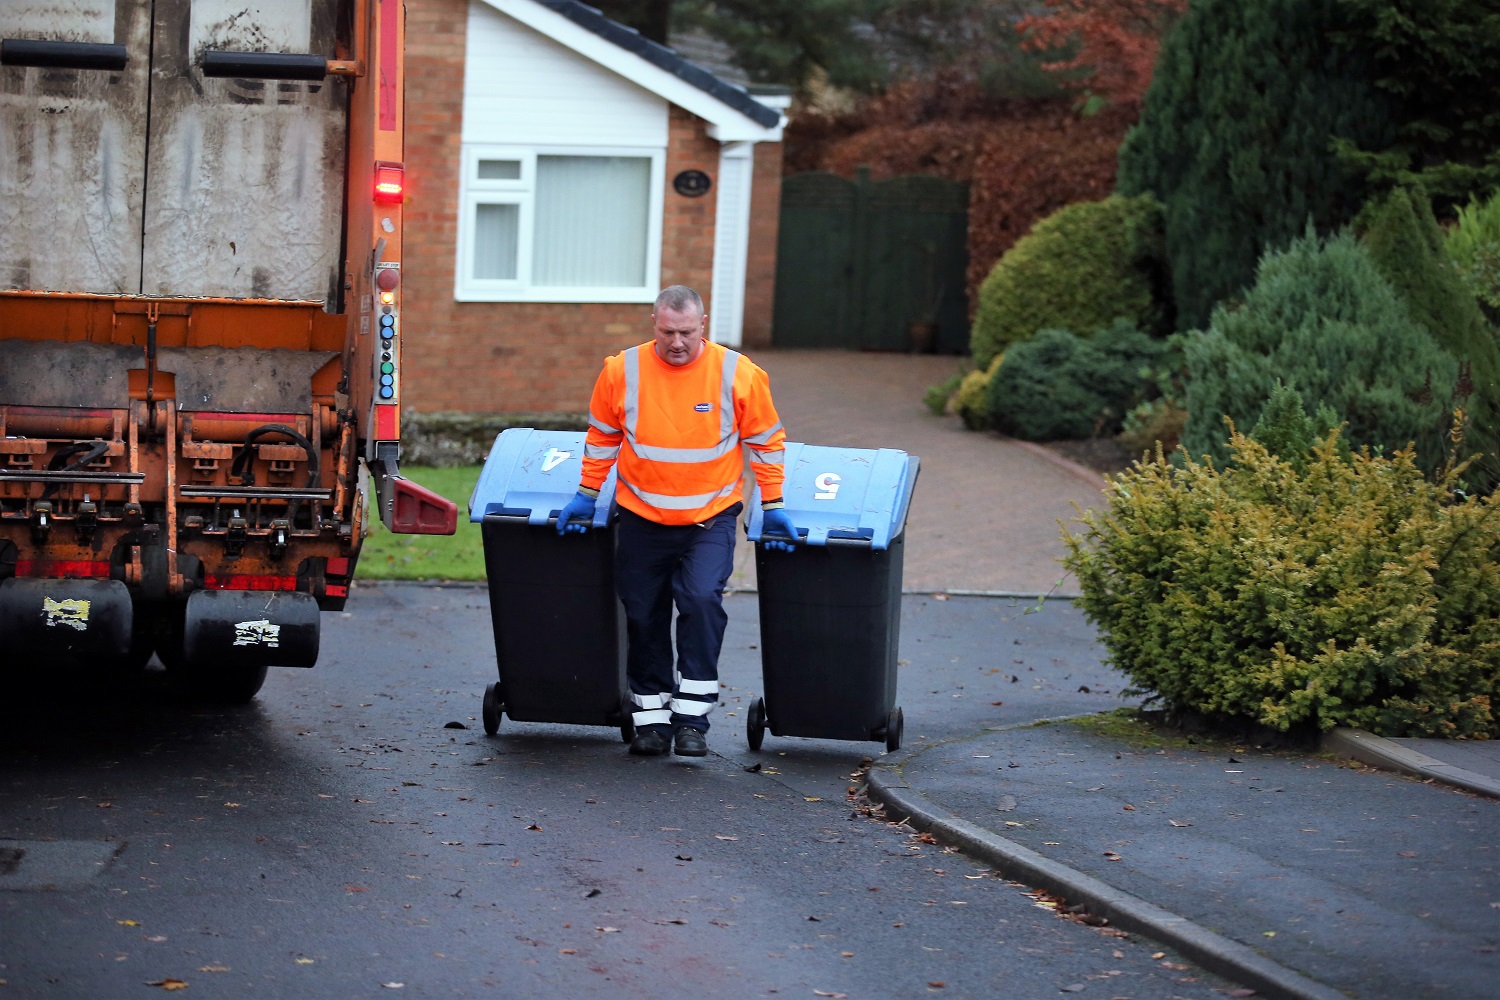 August Bank Holiday Bin Collections